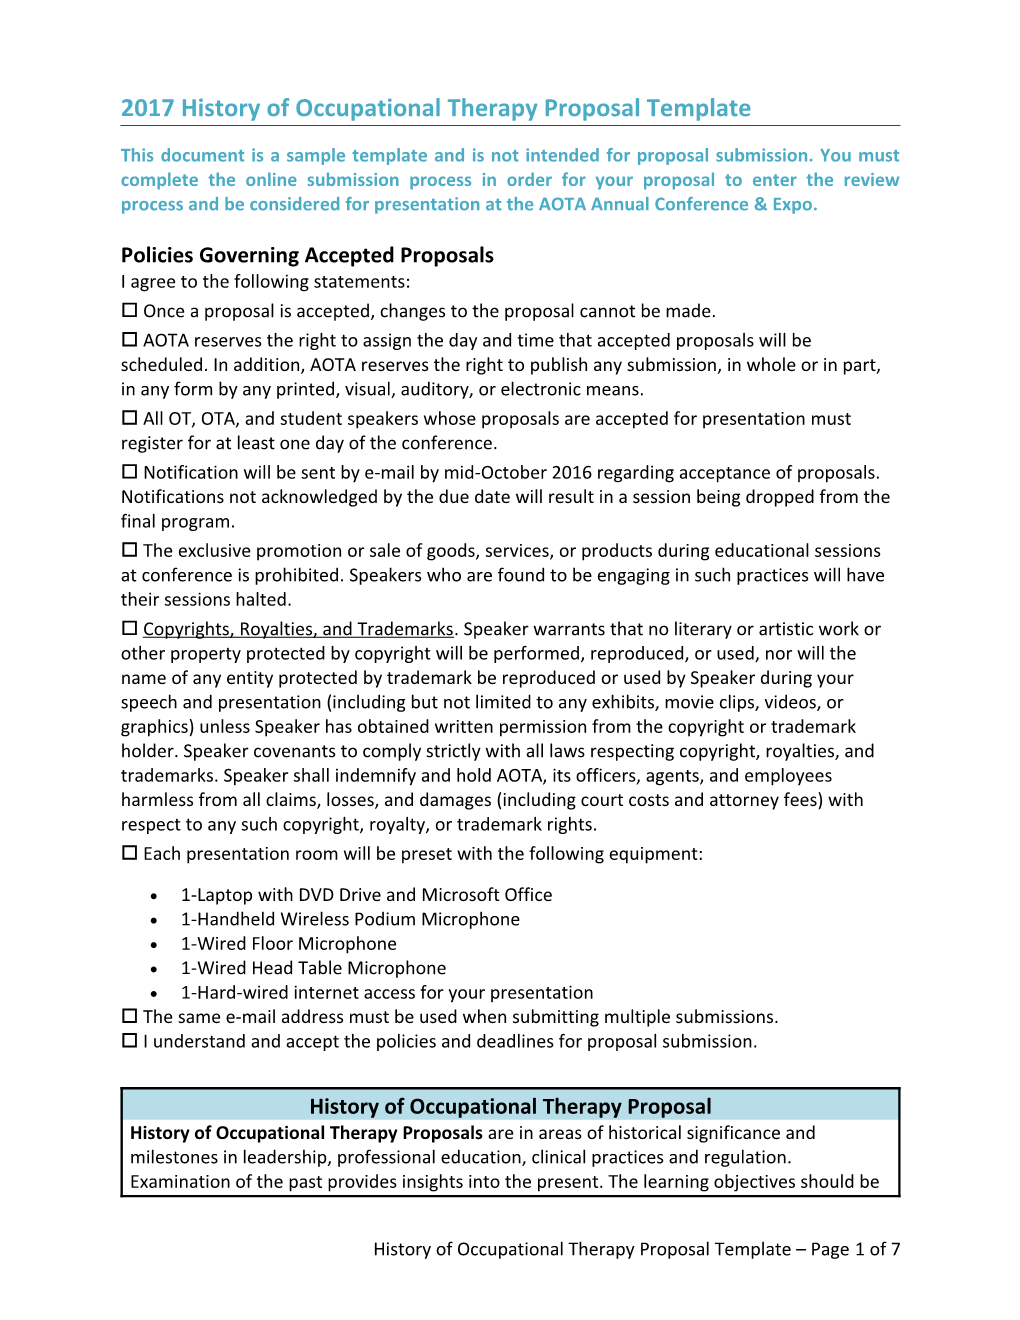 2017 History of Occupational Therapy Proposal Template